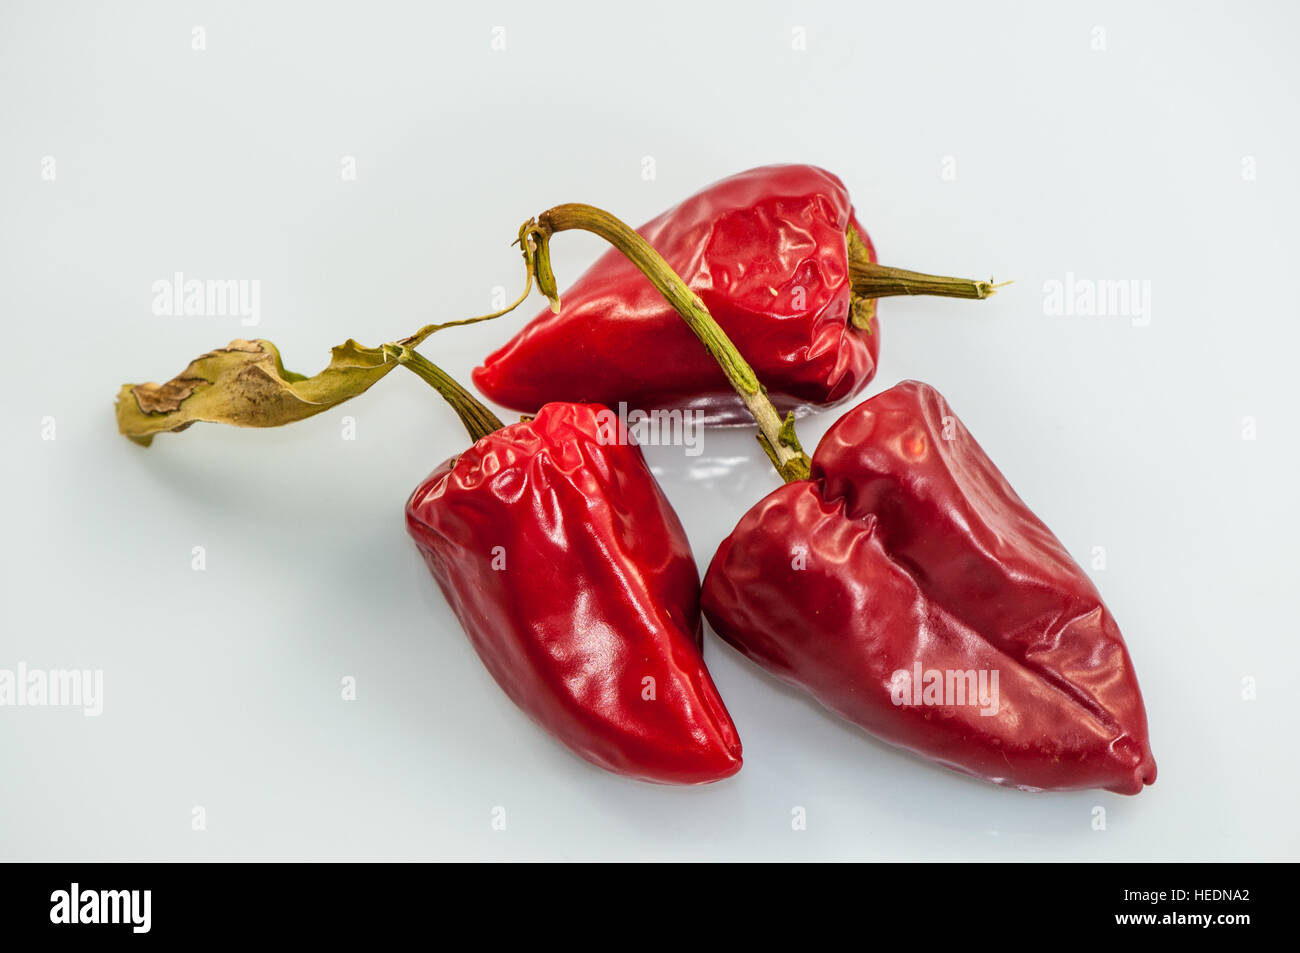 Red pepper overripe over a white background Stock Photo